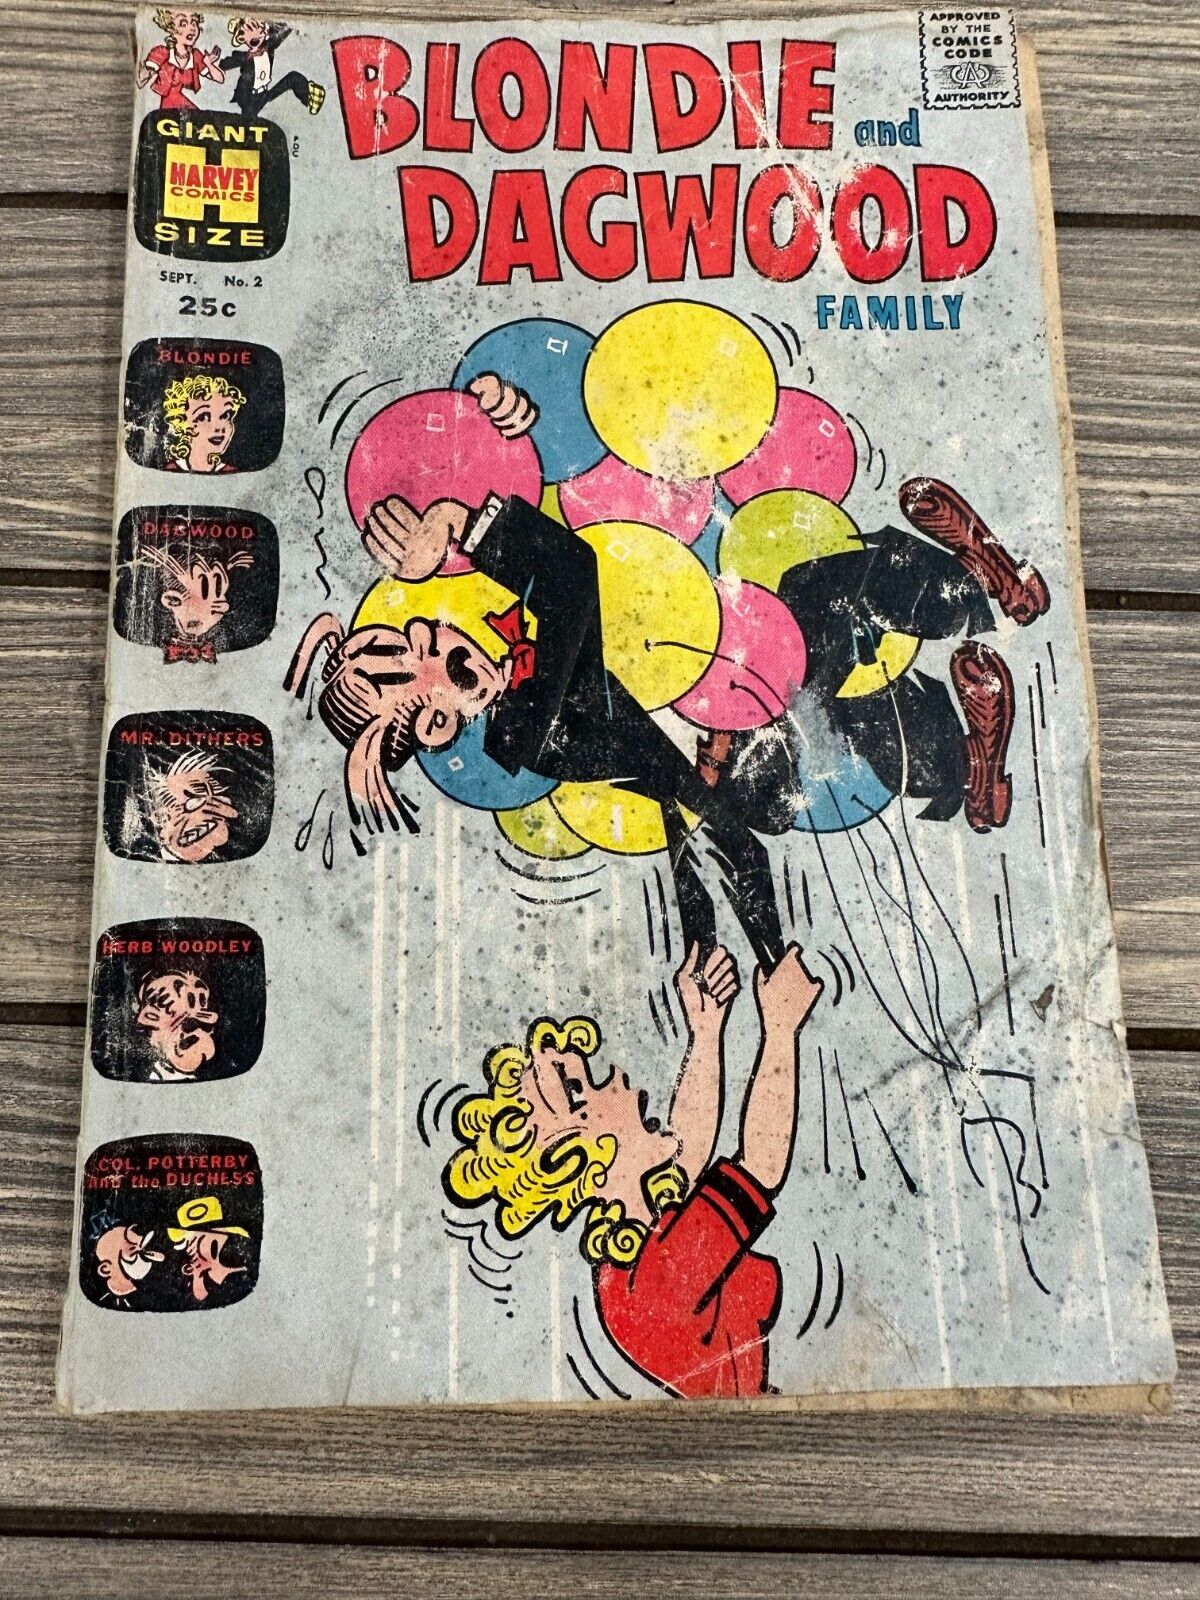 BLONDIE AND DAGWOOD FAMILY GIANT SIZE HARVEY COMICS SEPT VOL 1 NO 2 1964